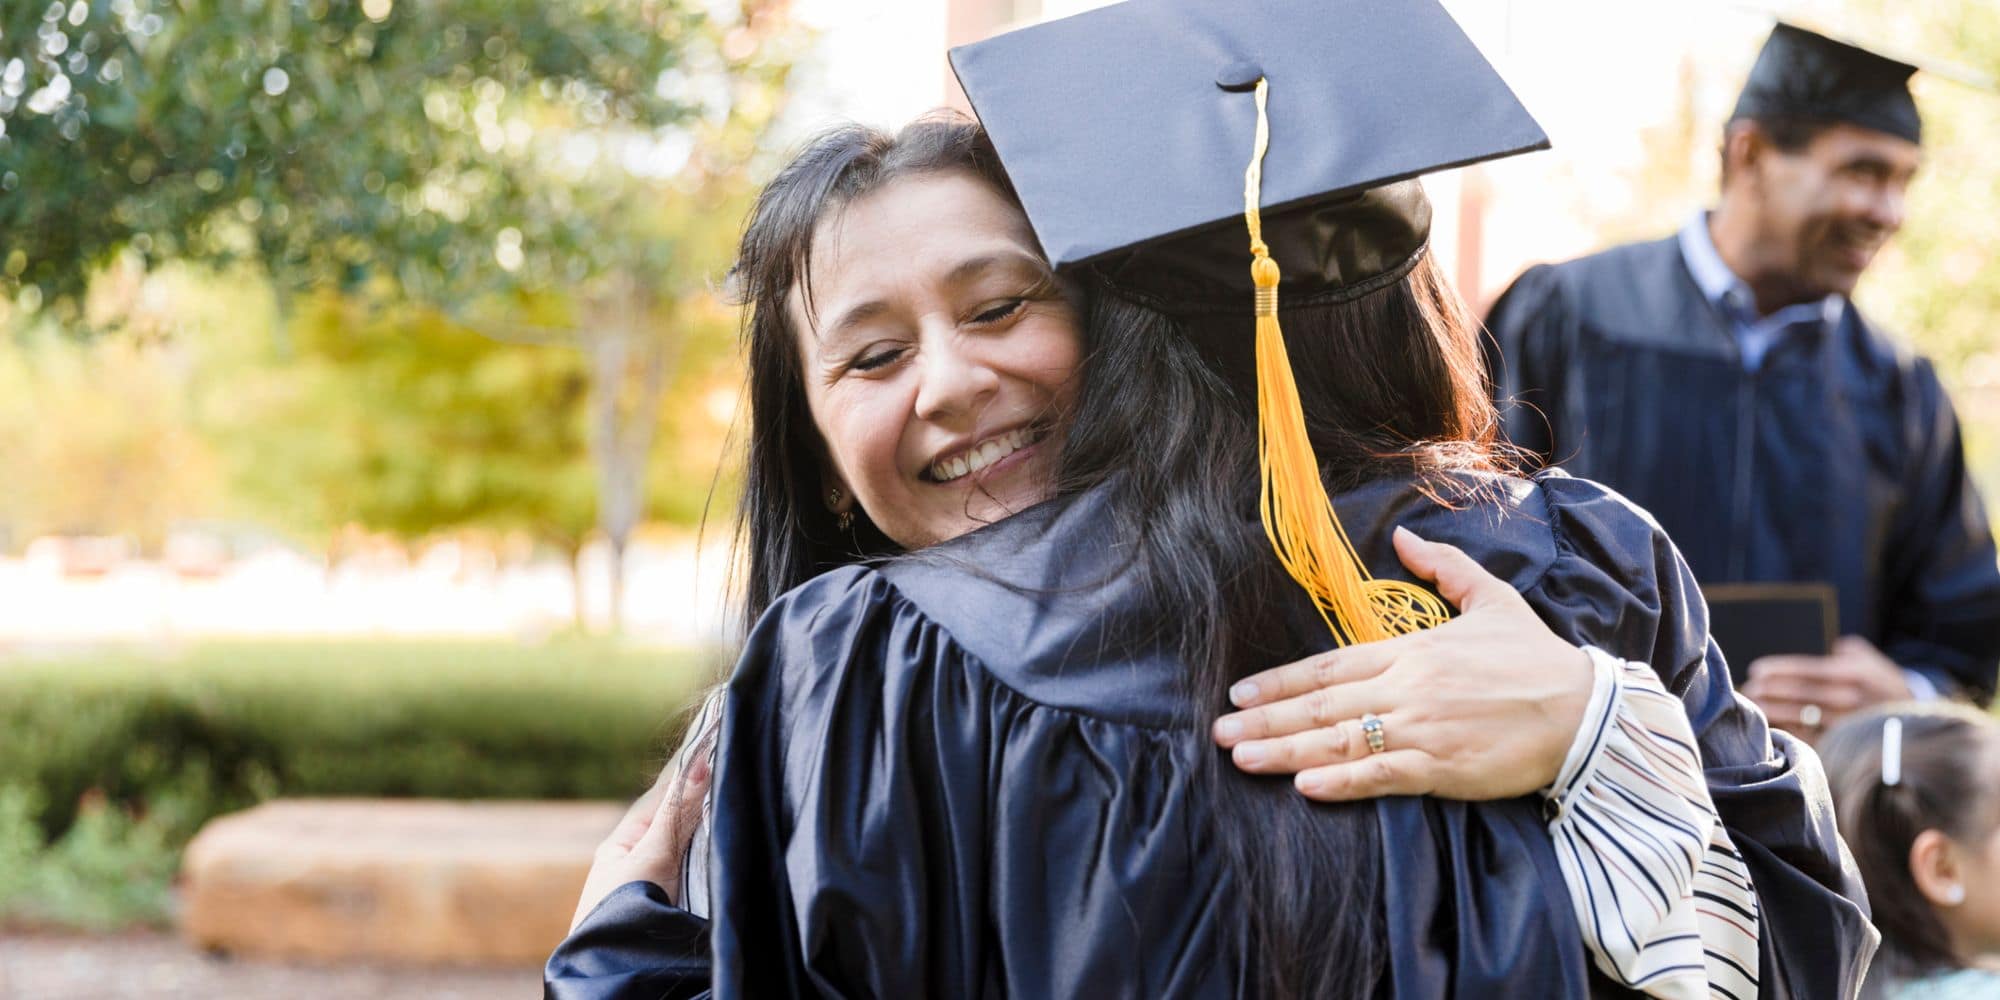 A college student in her graduation gown hugs her smiling mother.